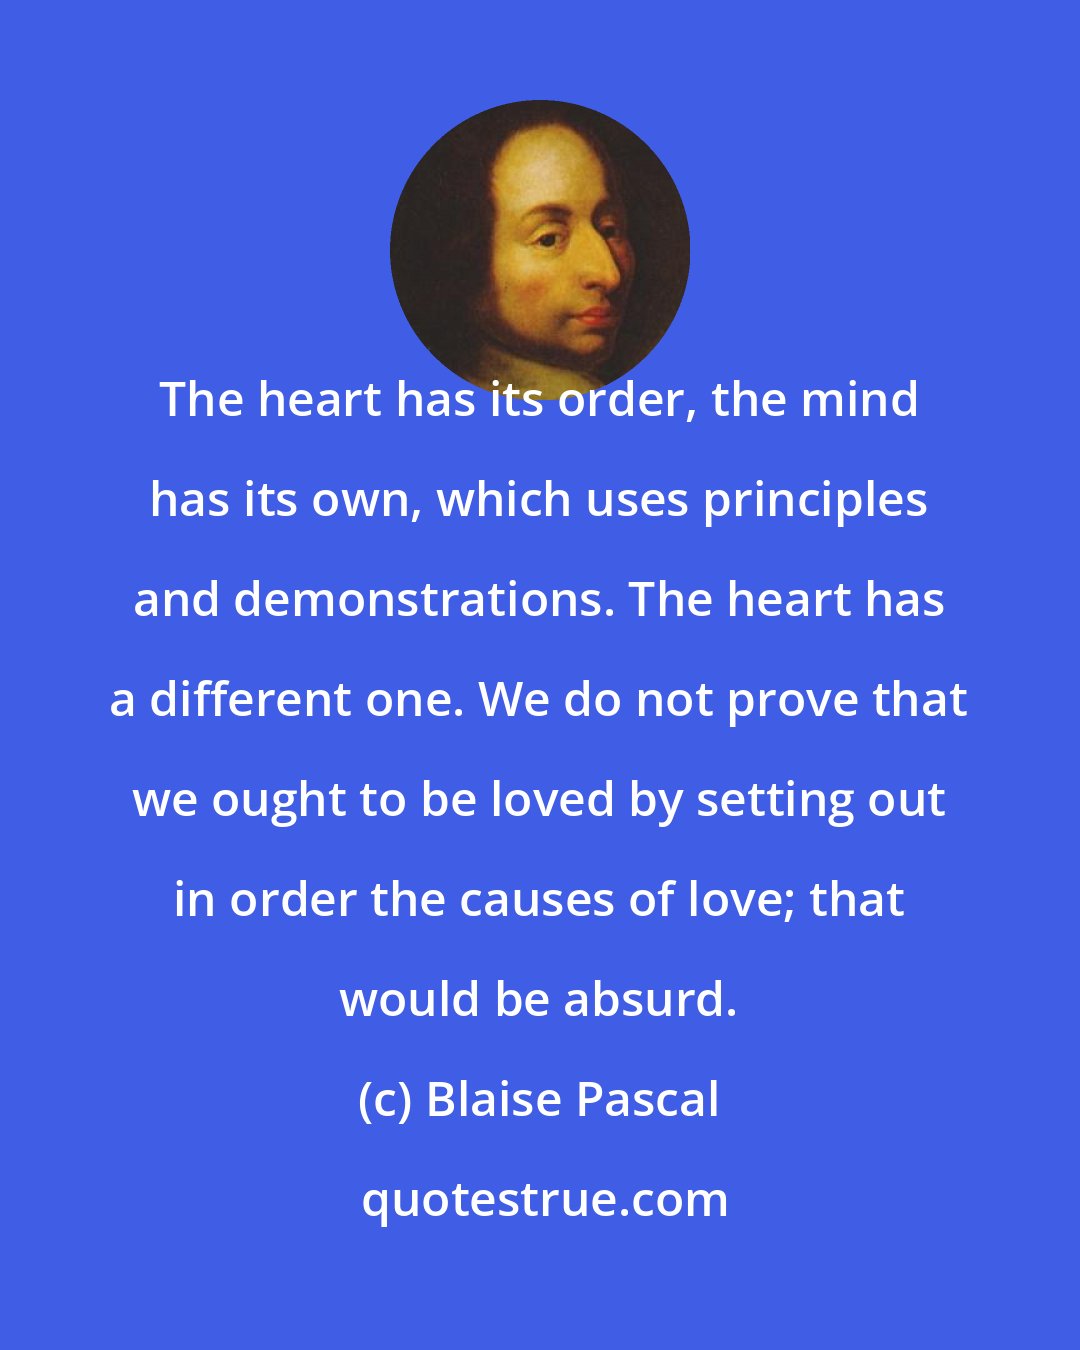 Blaise Pascal: The heart has its order, the mind has its own, which uses principles and demonstrations. The heart has a different one. We do not prove that we ought to be loved by setting out in order the causes of love; that would be absurd.